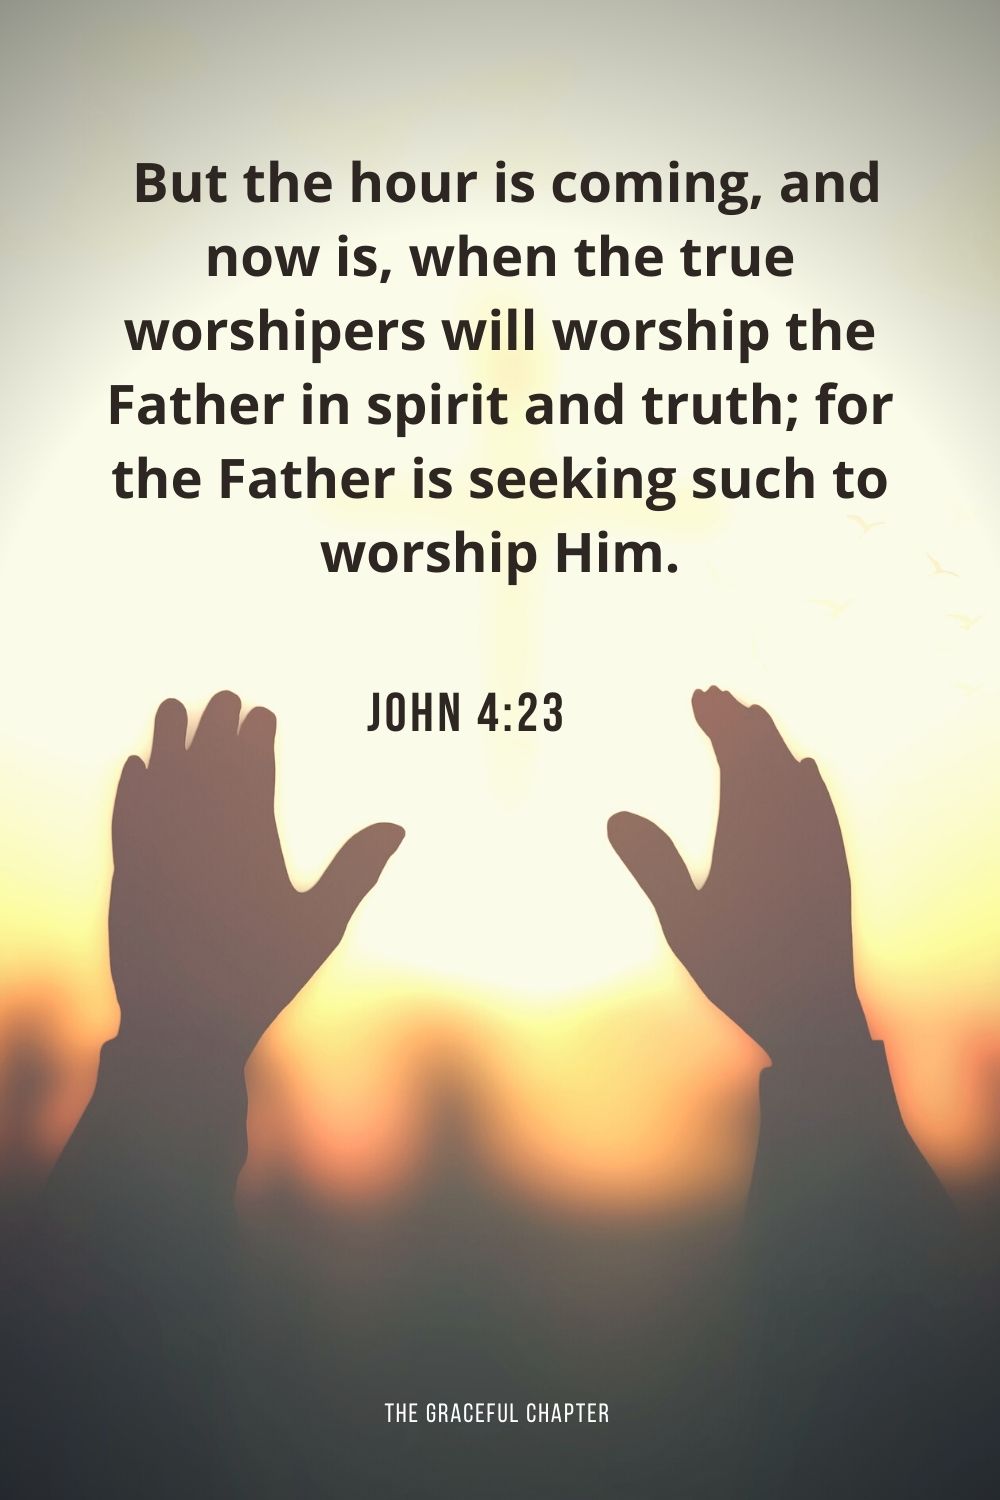  But the hour is coming, and now is, when the true worshipers will worship the Father in spirit and truth; for the Father is seeking such to worship Him. John 4:23